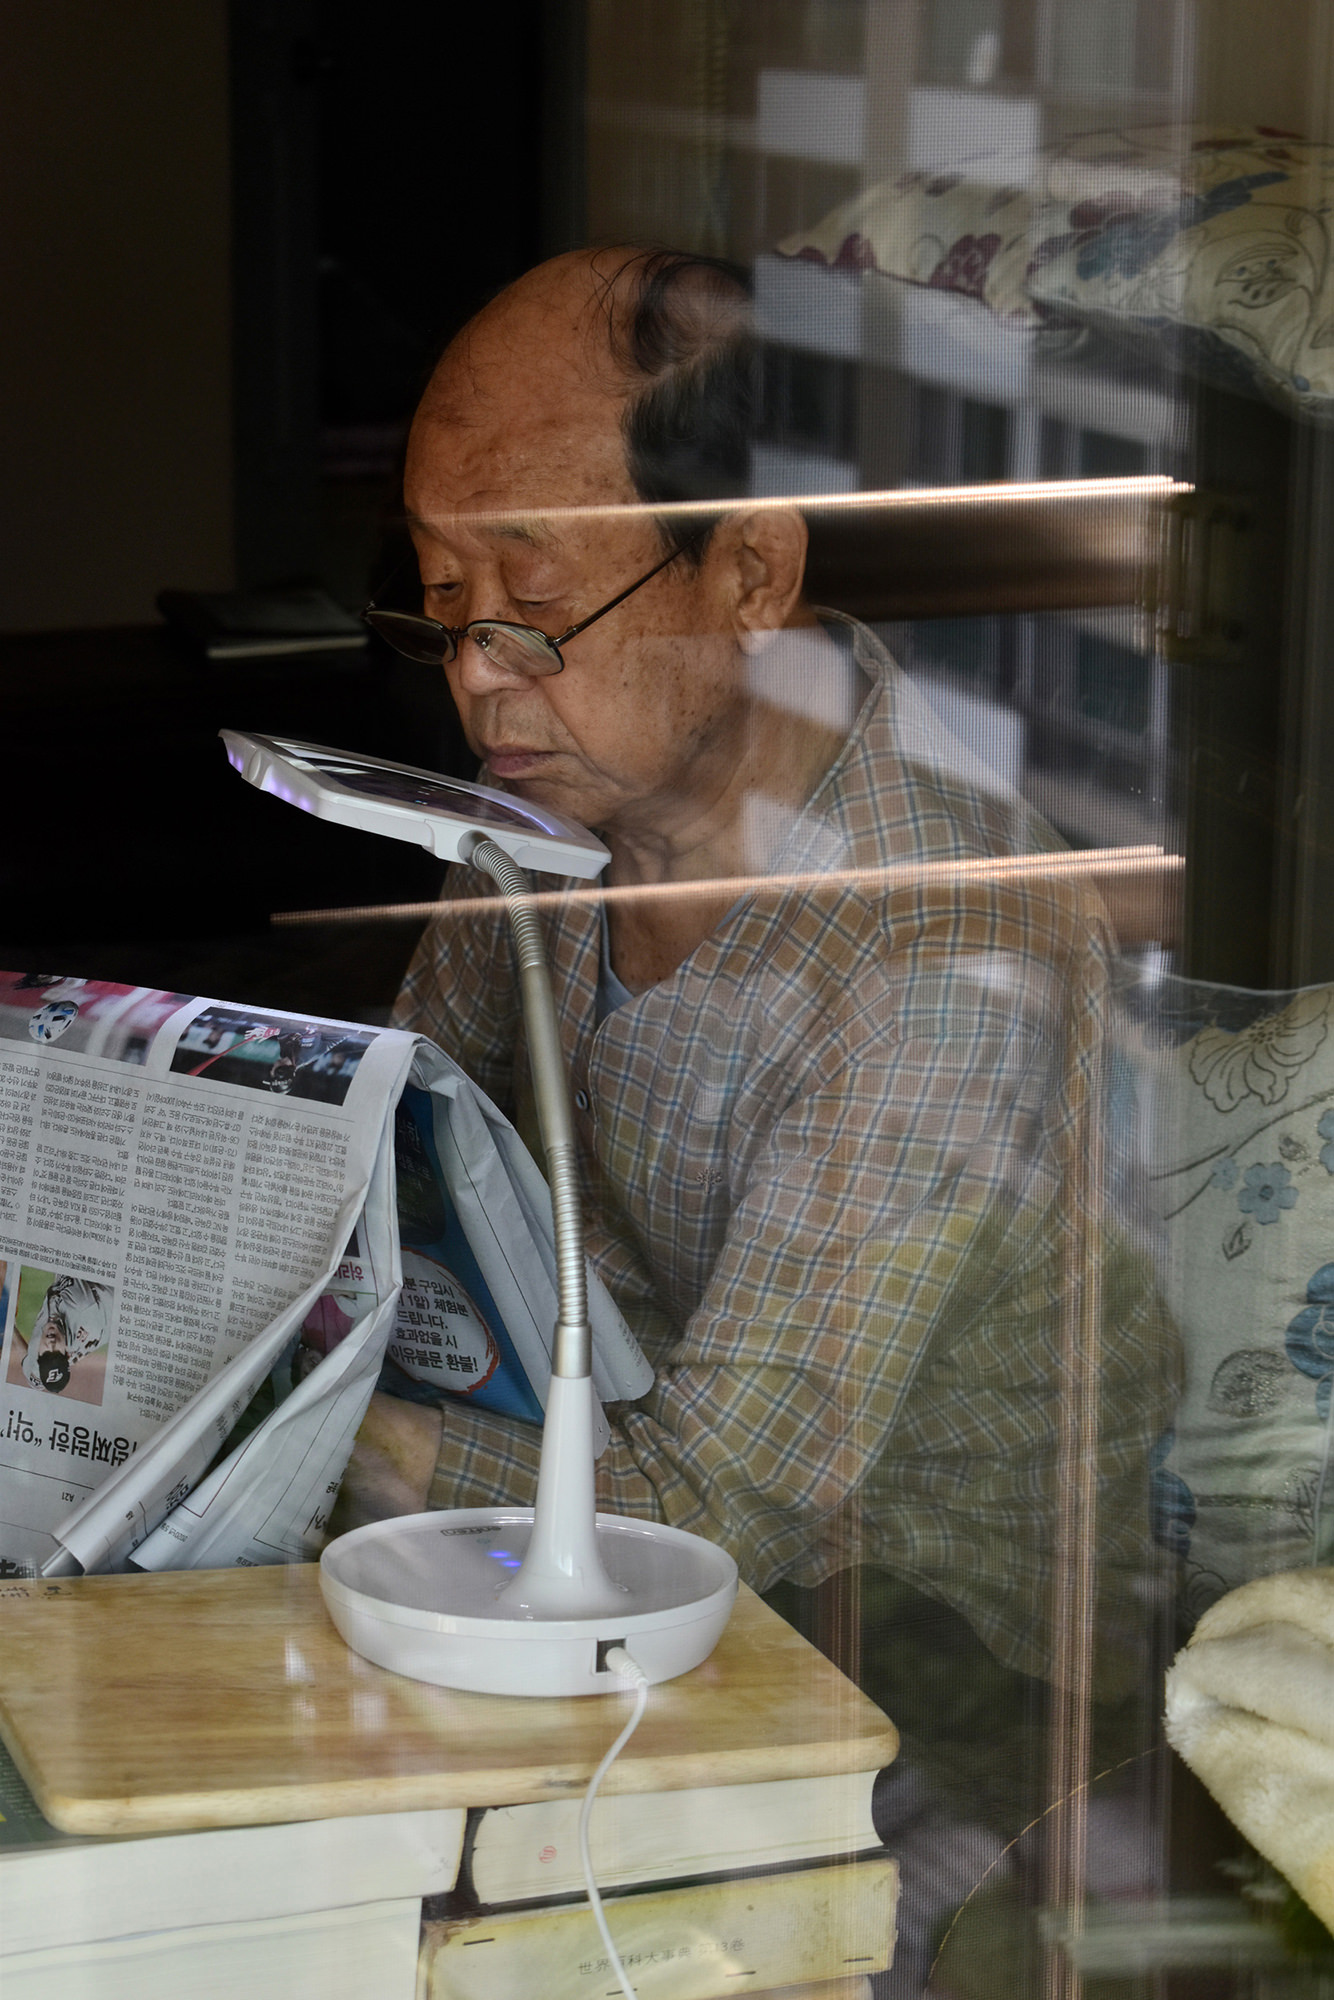 Image description: the artist’s Asian grandfather reading a newspaper, unaware of the camera and photographed through glass, which shows reflections. Photo by Annie Son, 18.